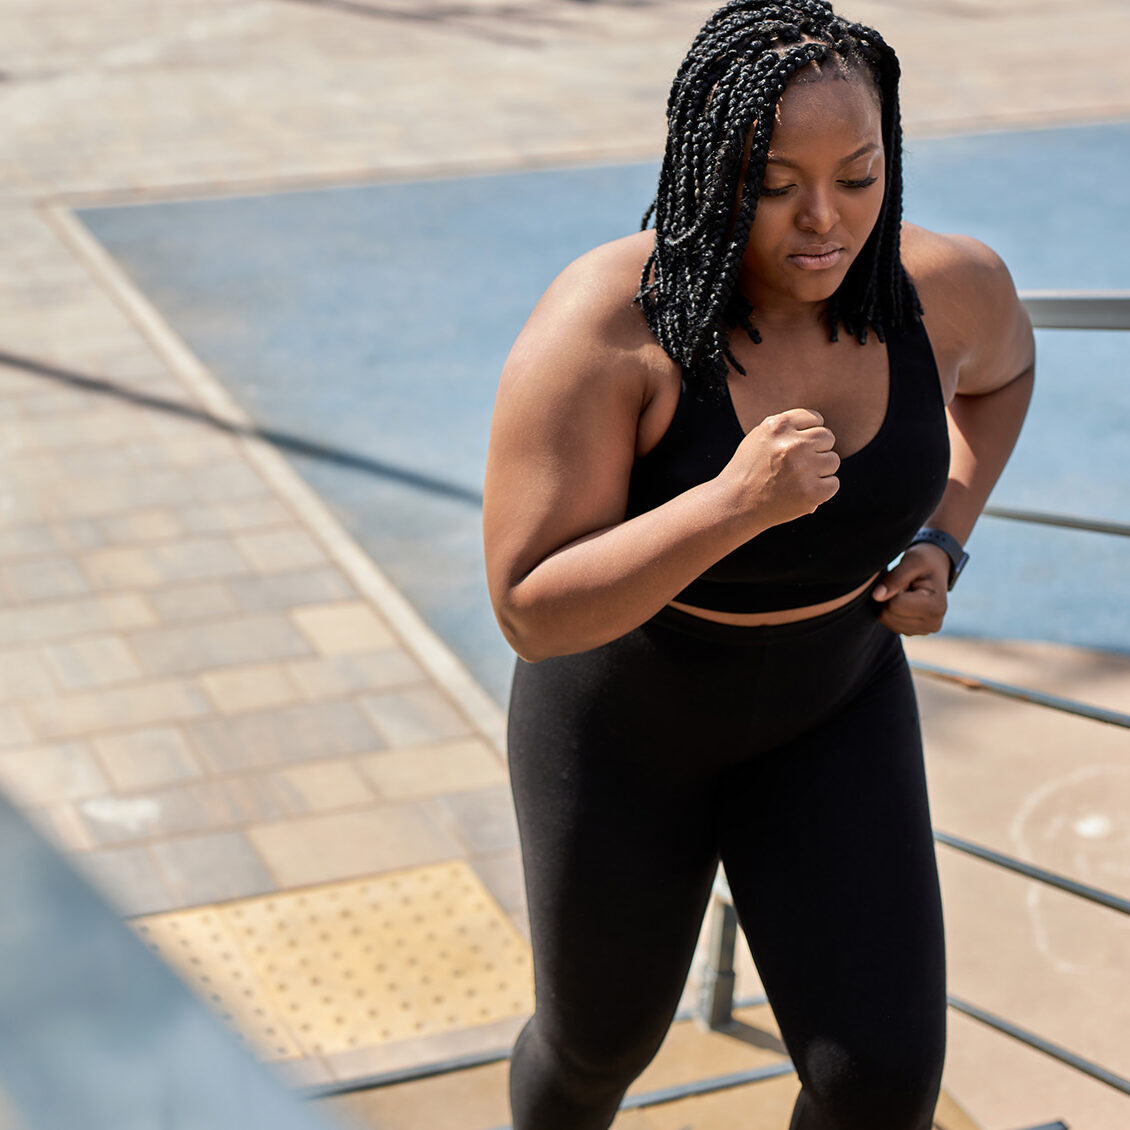 Obese young african woman foing fitness exercises on stairs outdoors. Weight loss cardio goal achievement challenge. Copy space. Side view portrait of black lady in black tracksuit engaged in fitness